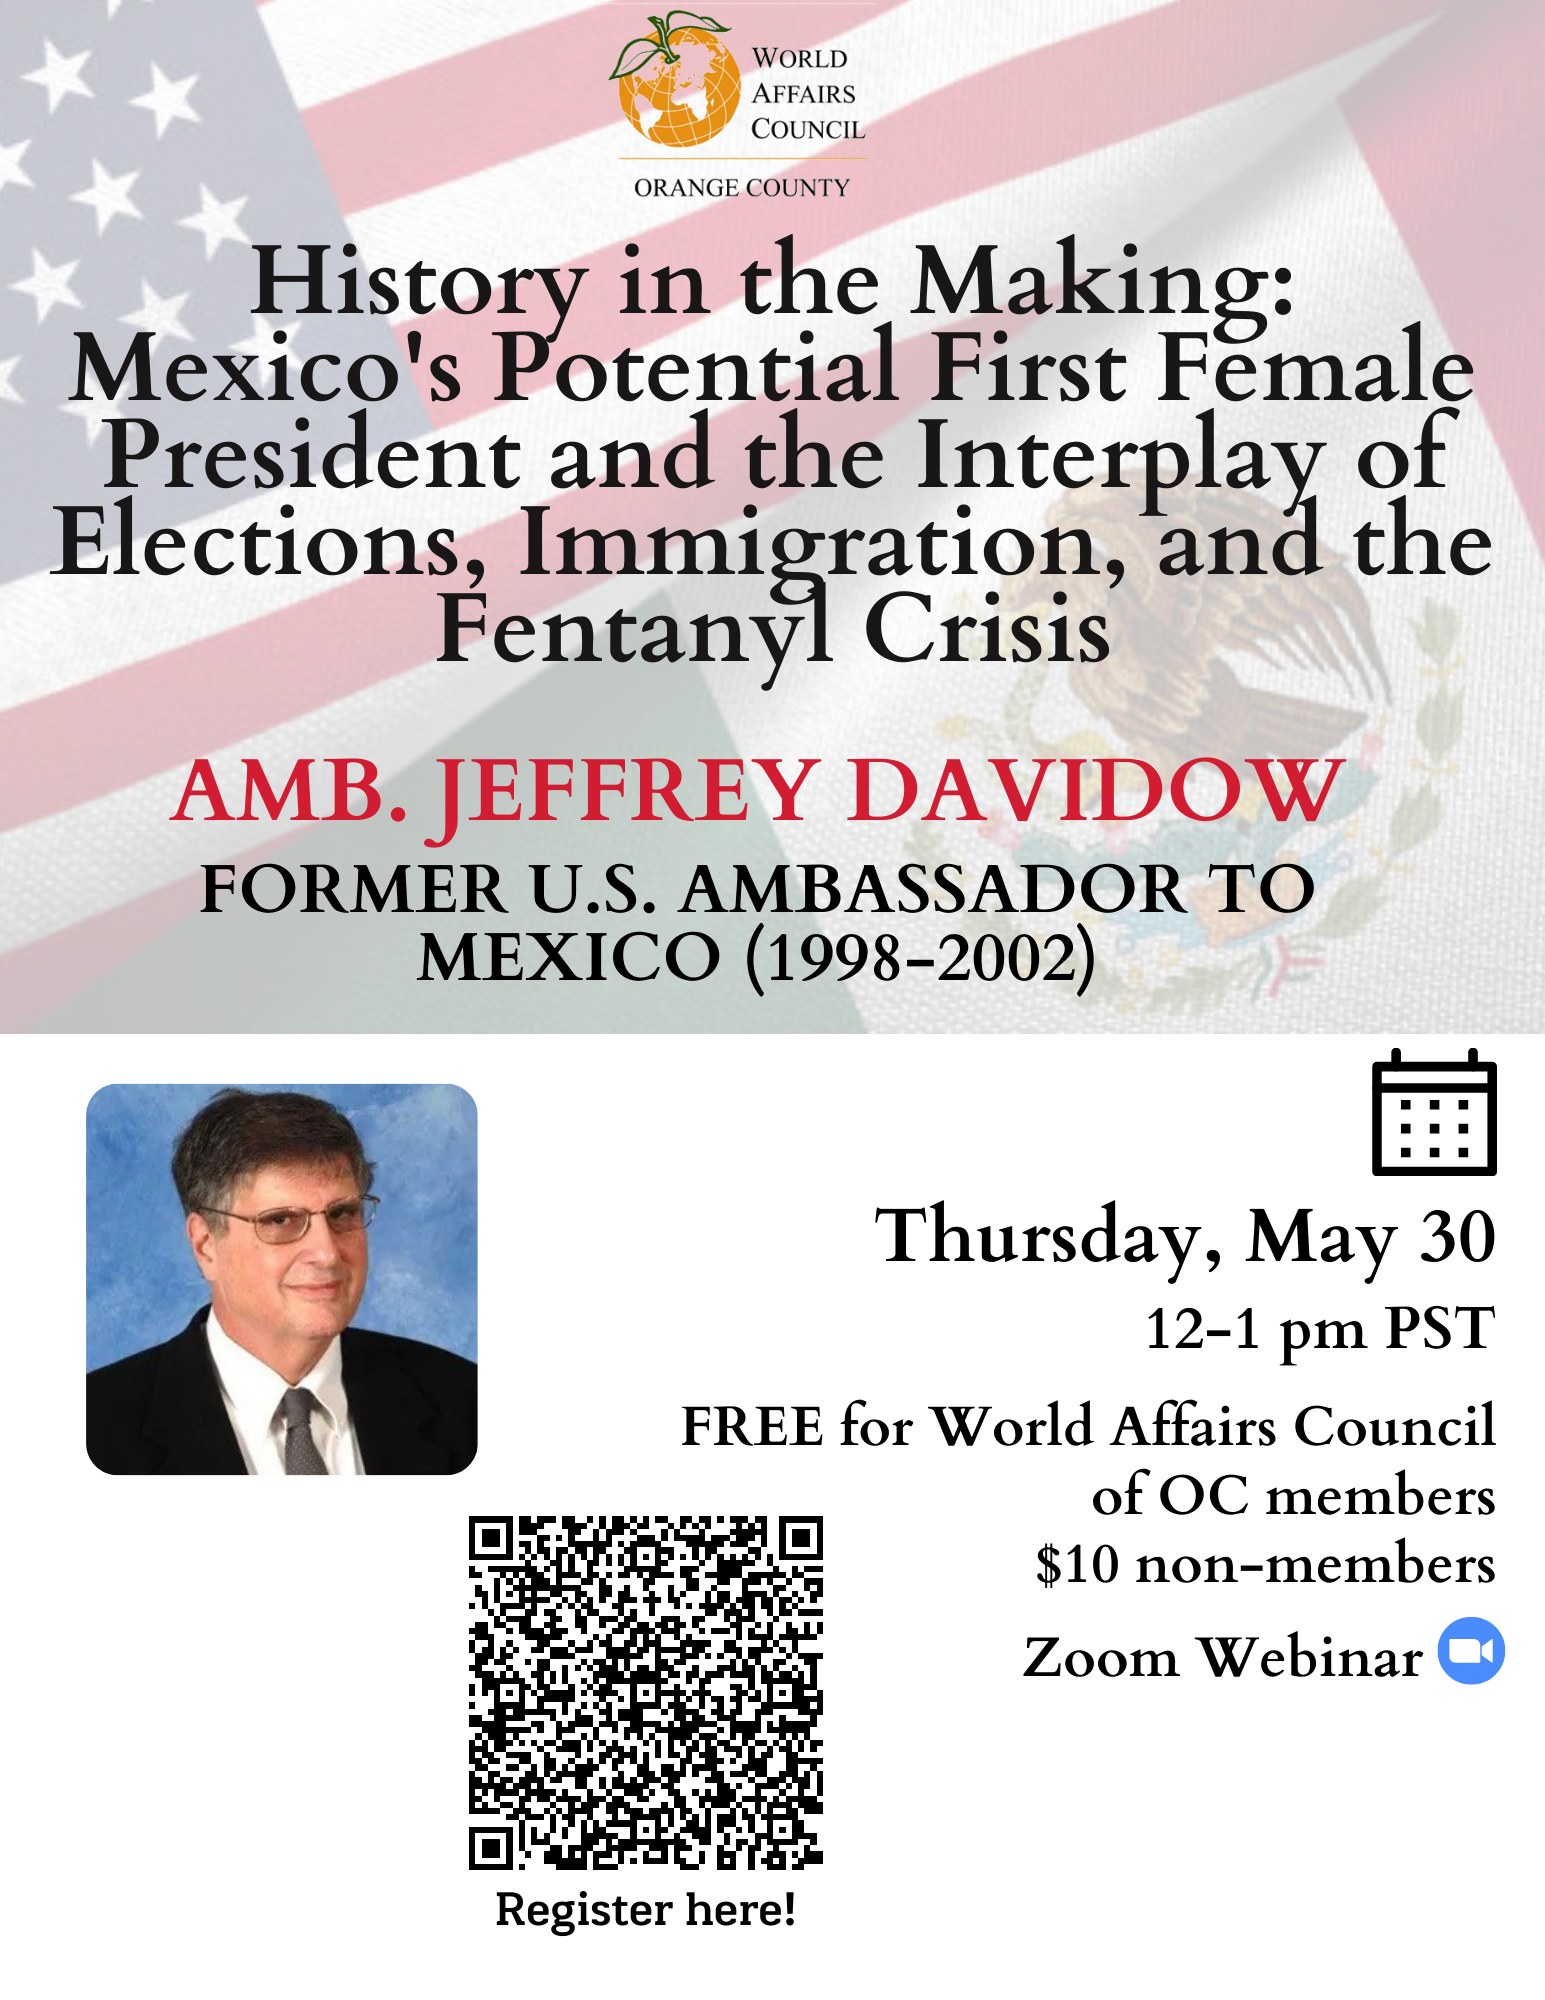 WEBINAR: "History in the Making: Mexico's Potential First Female President" with Ambassador Davidow, former U.S. Amb. to Mexico